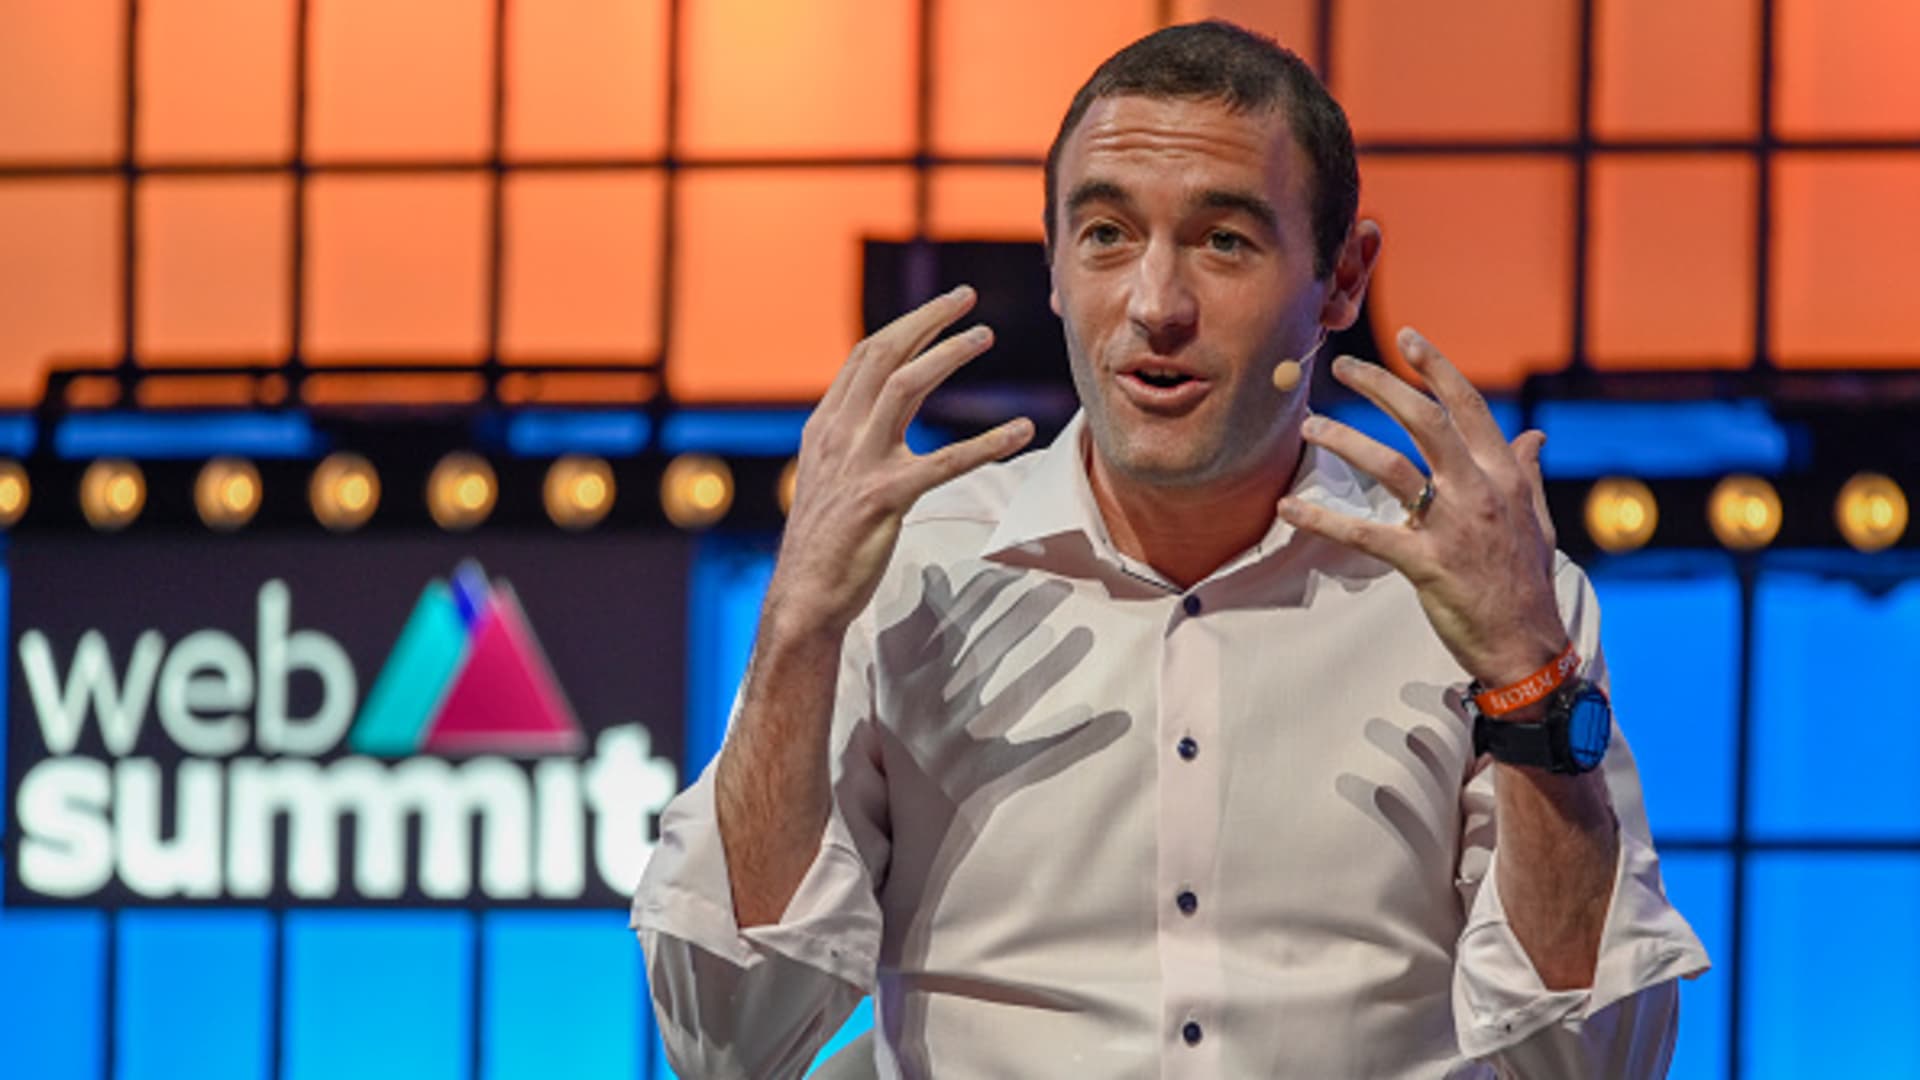 Kevin Weil, VP of product at Facebook's Calibra, speaks on stage at the Web Summit technology conference in Lisbon, Portugal on November 5, 2019.